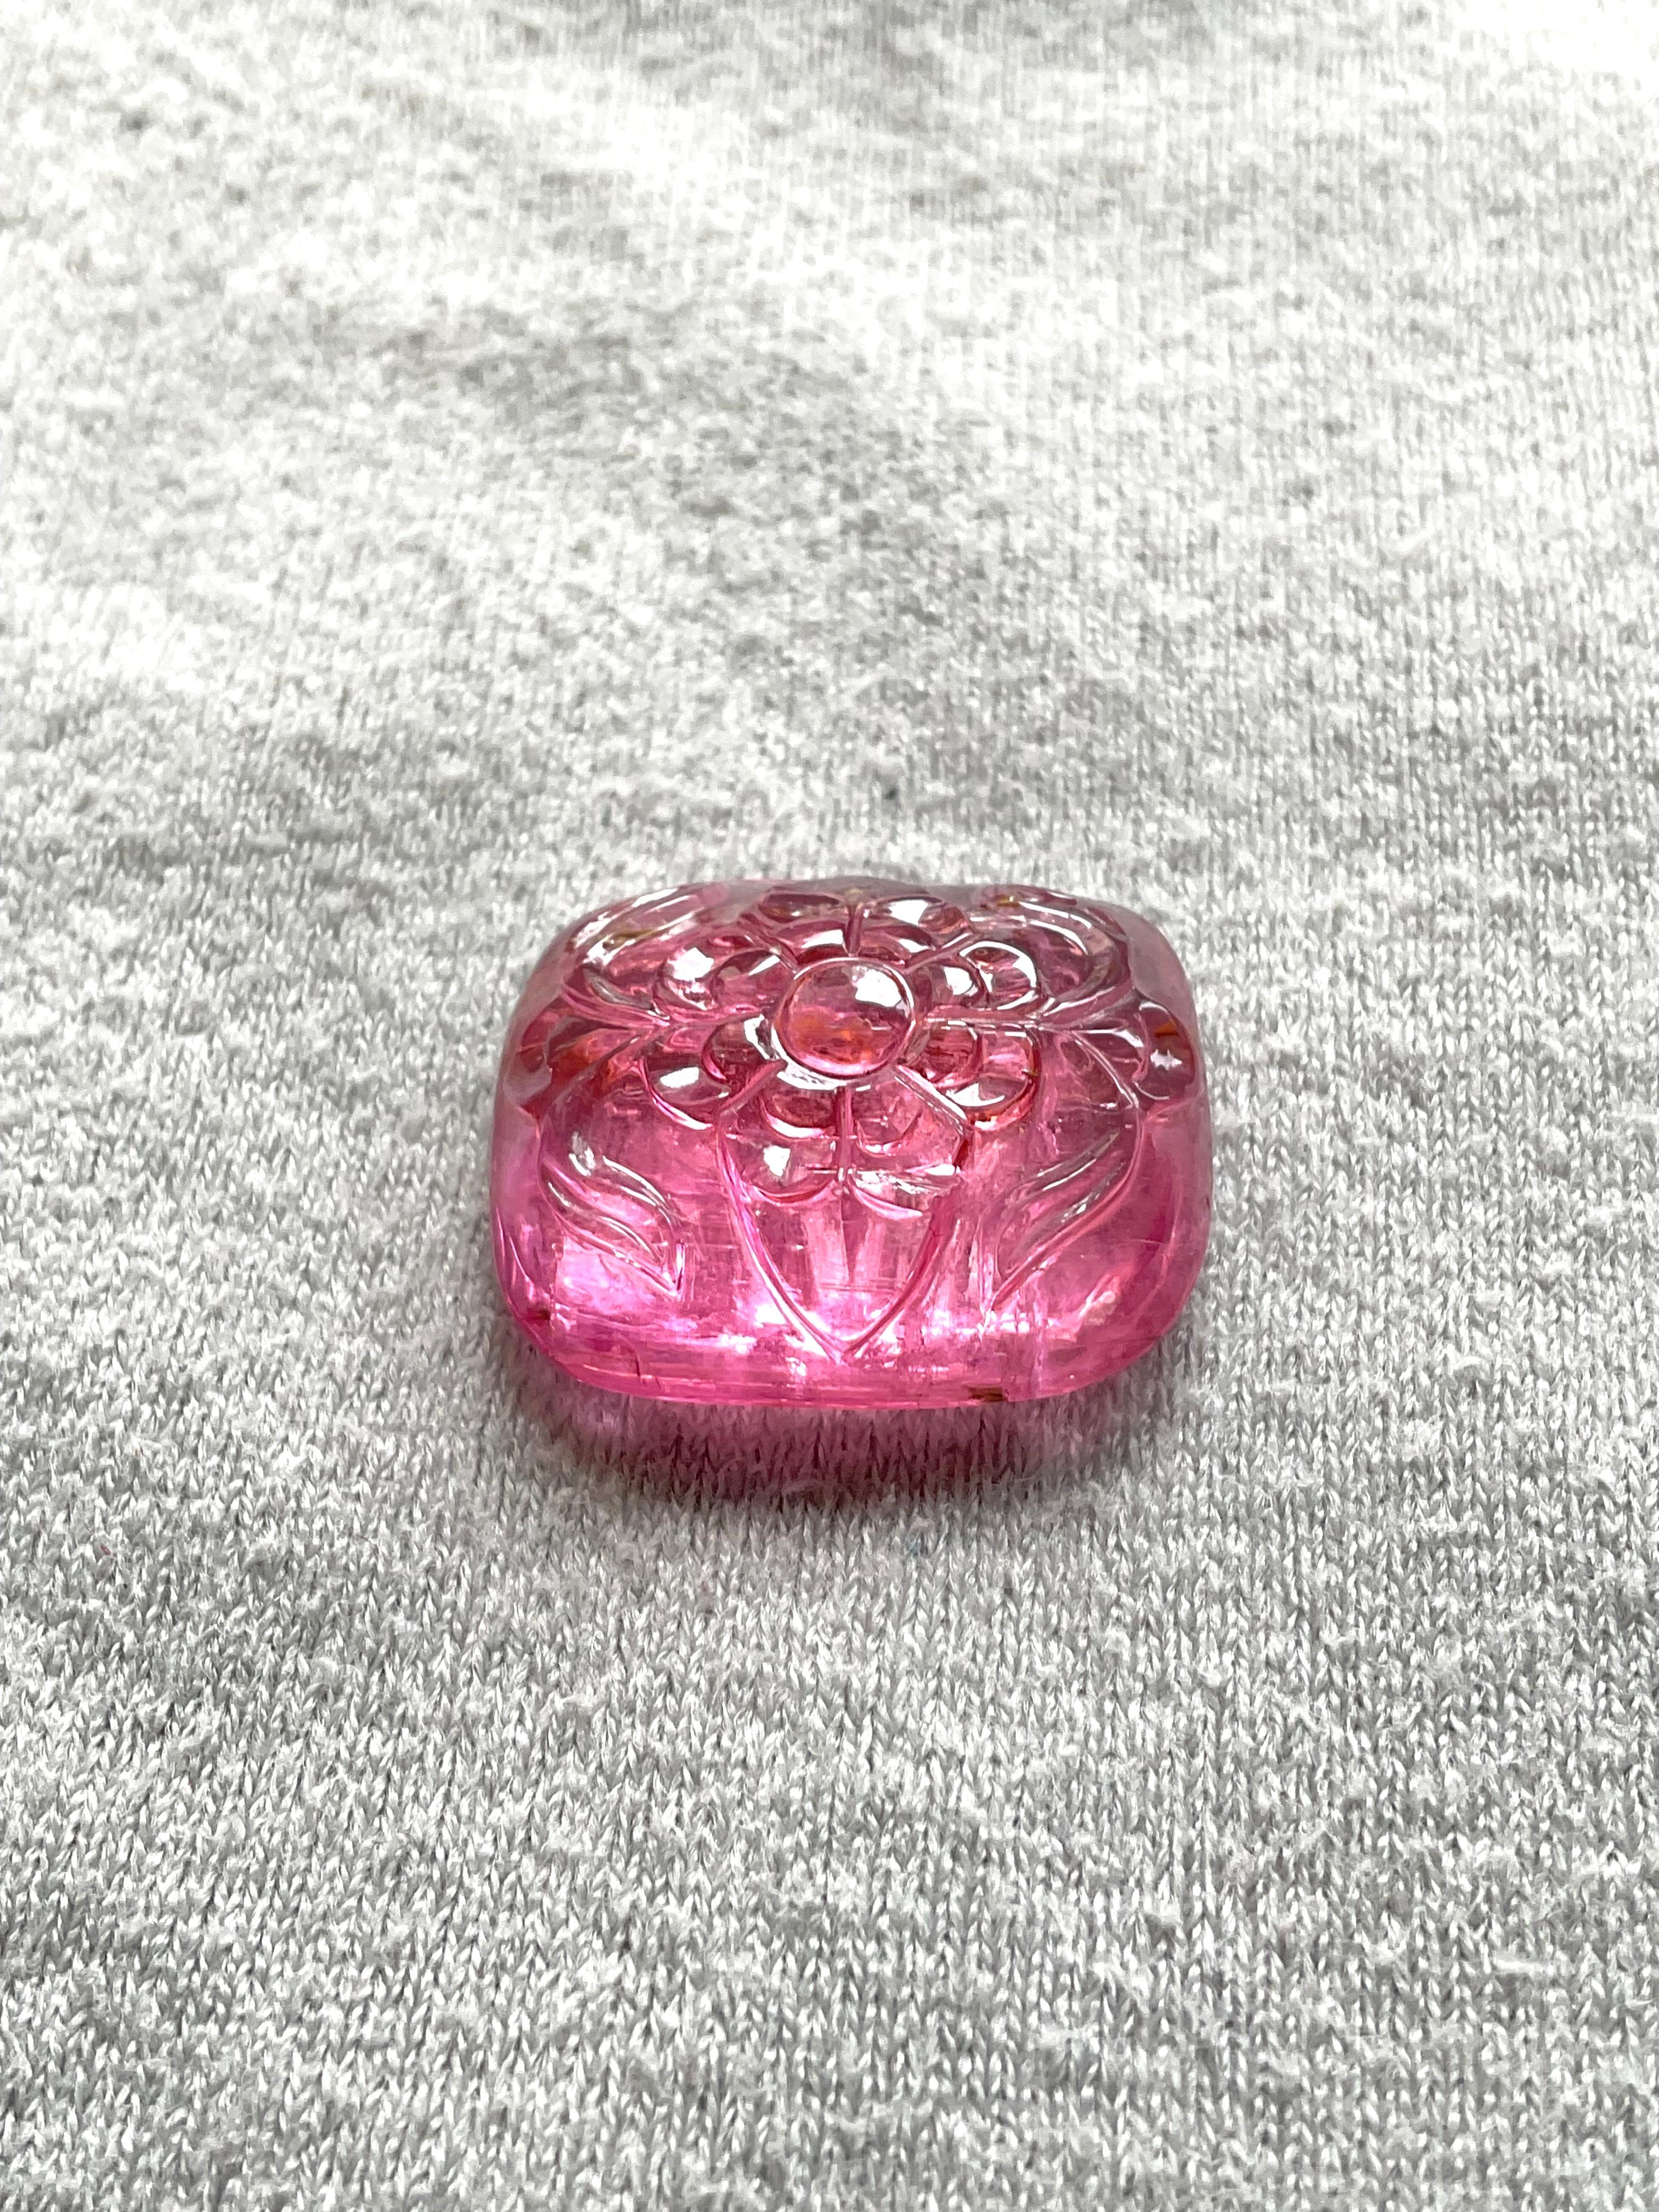 26.76 Carats Top Quality Rubellite Tourmaline Carved Fine Jewelry Natural Gem 1